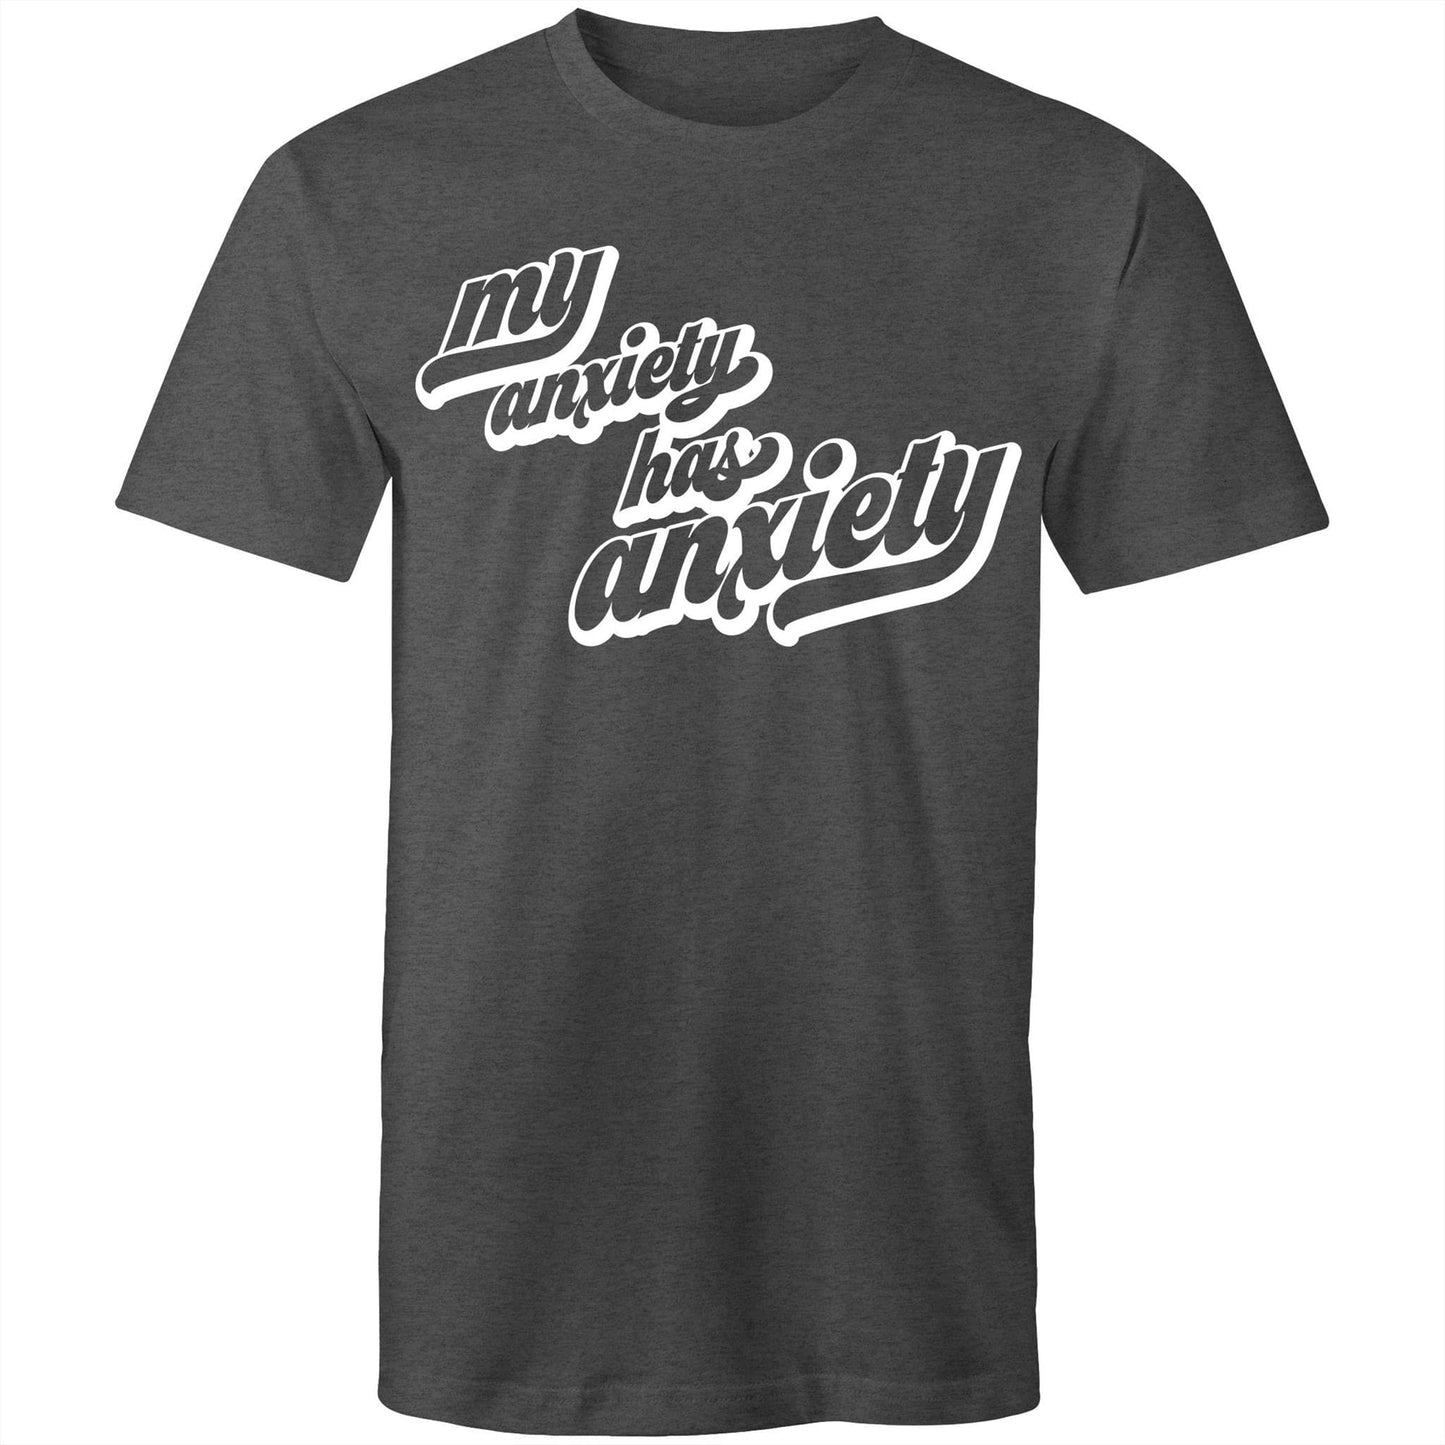 Mens T-Shirt - My Anxiety has Anxiety